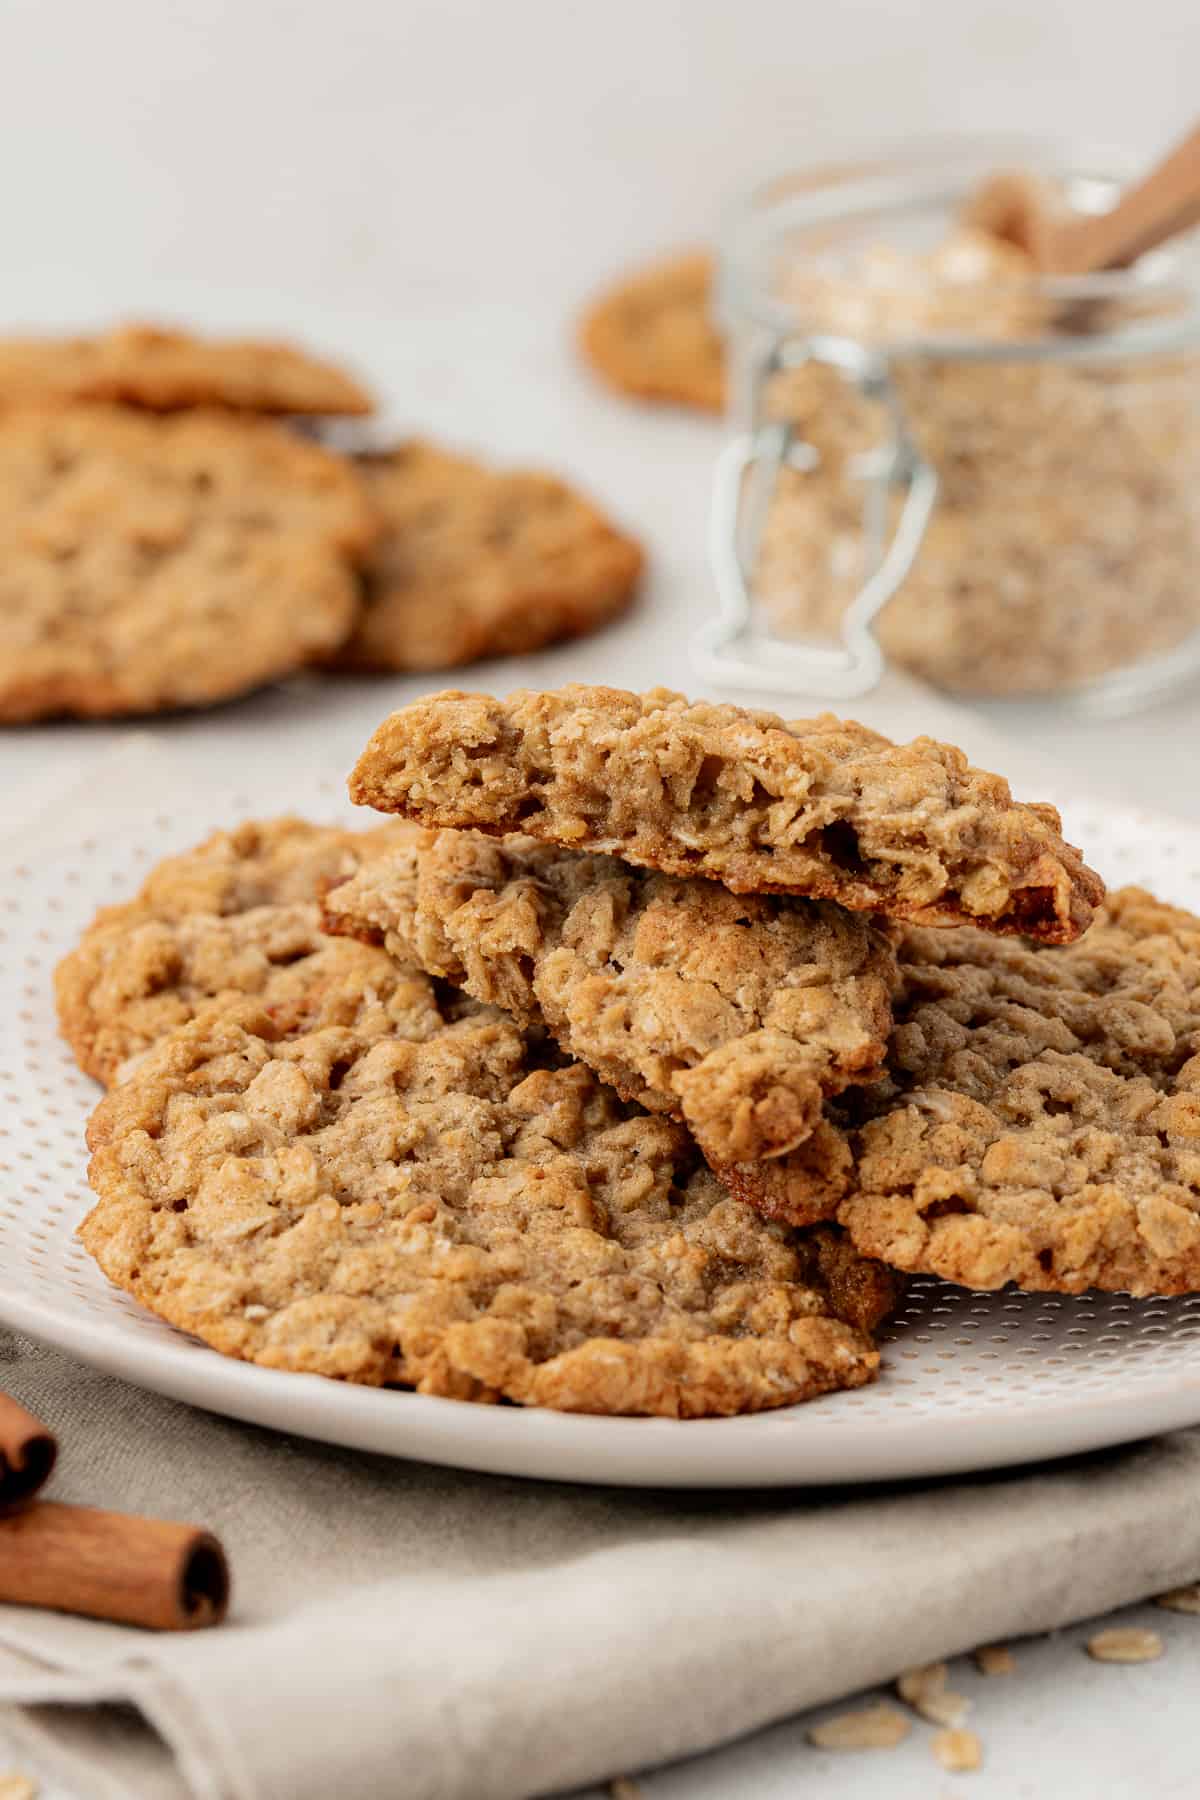 a white plate with a pile of oatmeal cookies on it on top of a tan kitchen towel with cinnamon sticks beside it, more cookies and a jar of brown sugar in the background